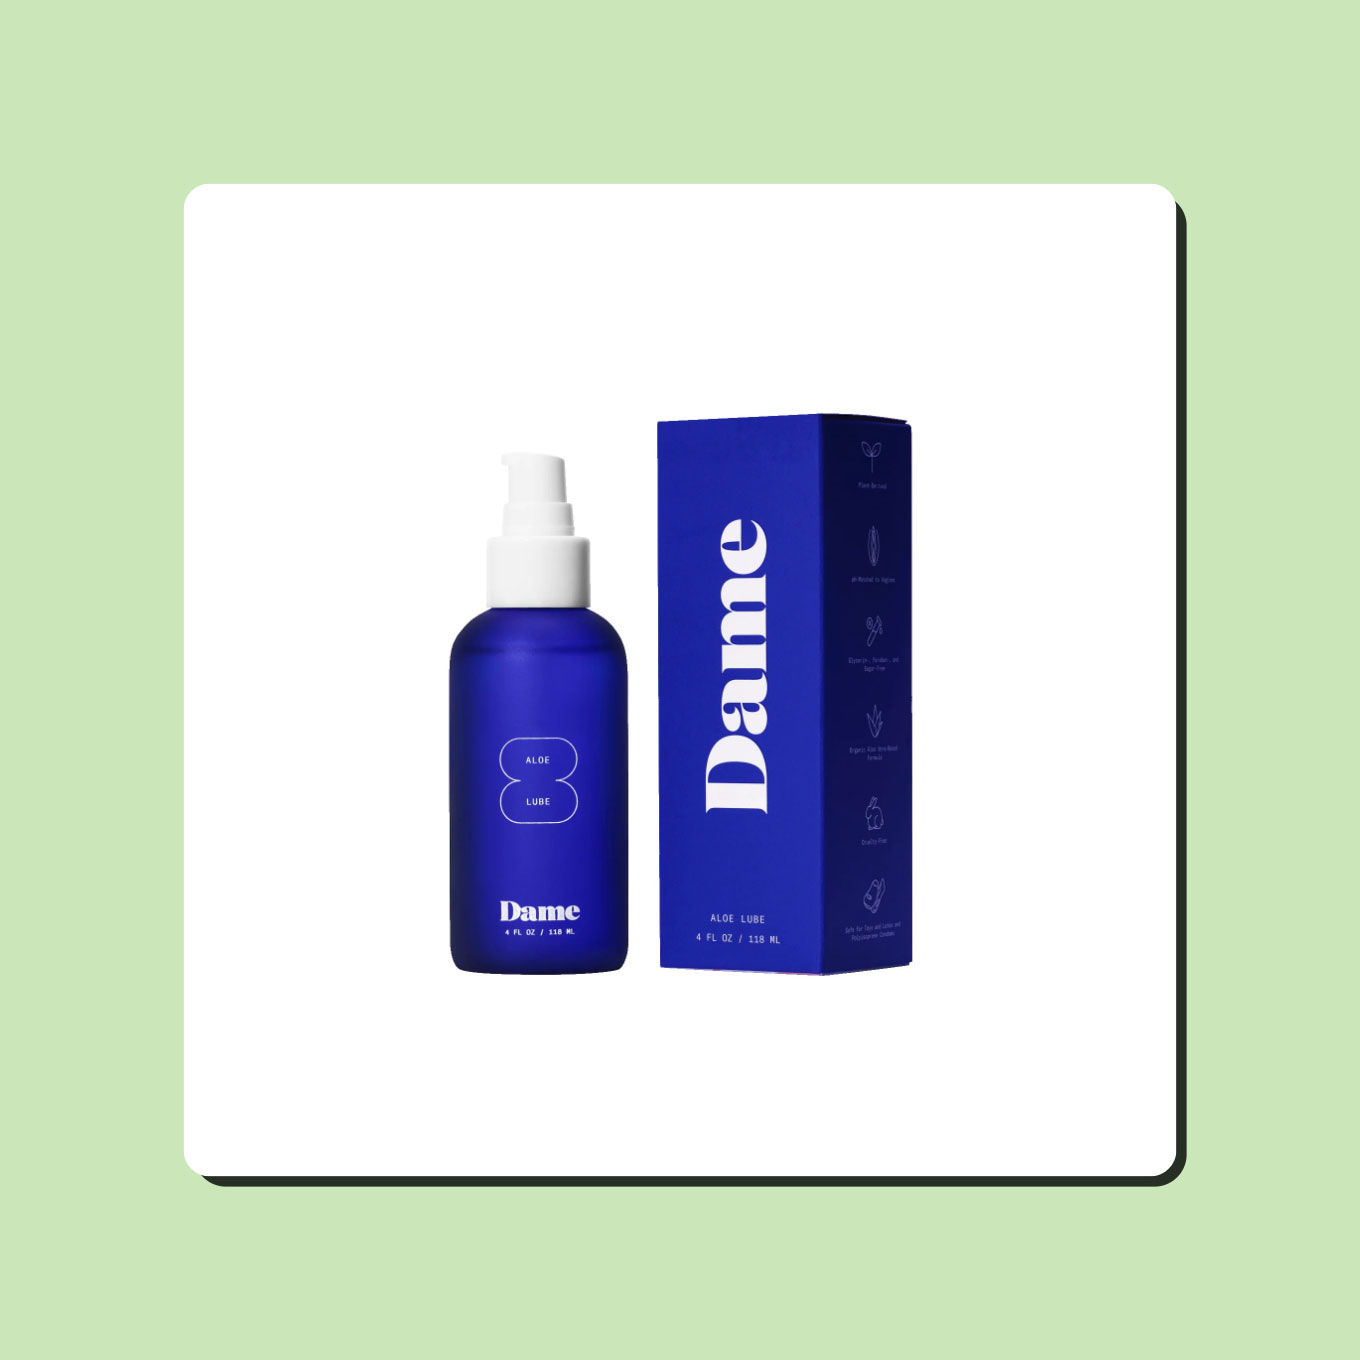 Dame's aloe lube is in a blue bottle, next to a blue box